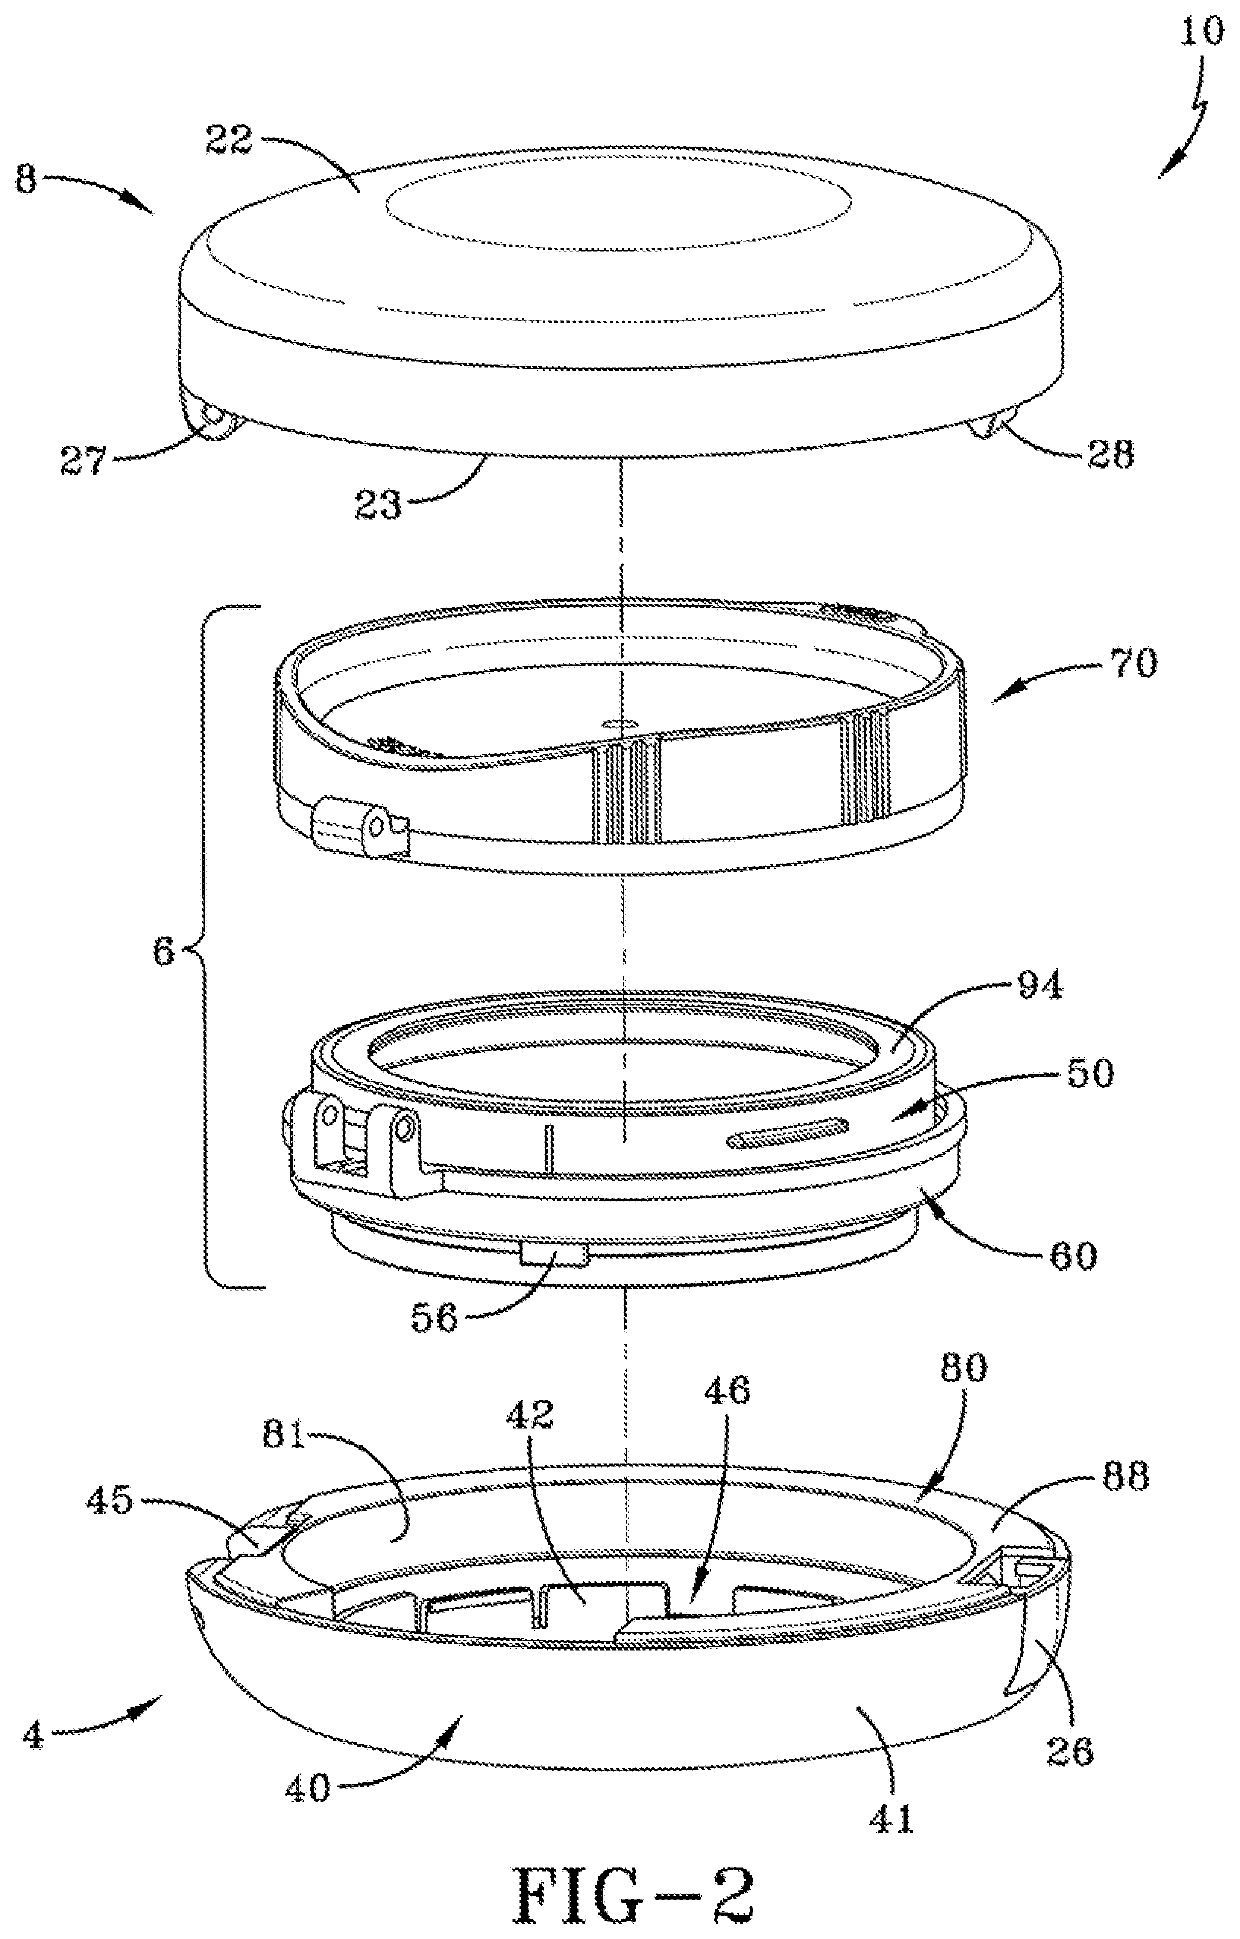 Device having a sealable container for a volatile composition